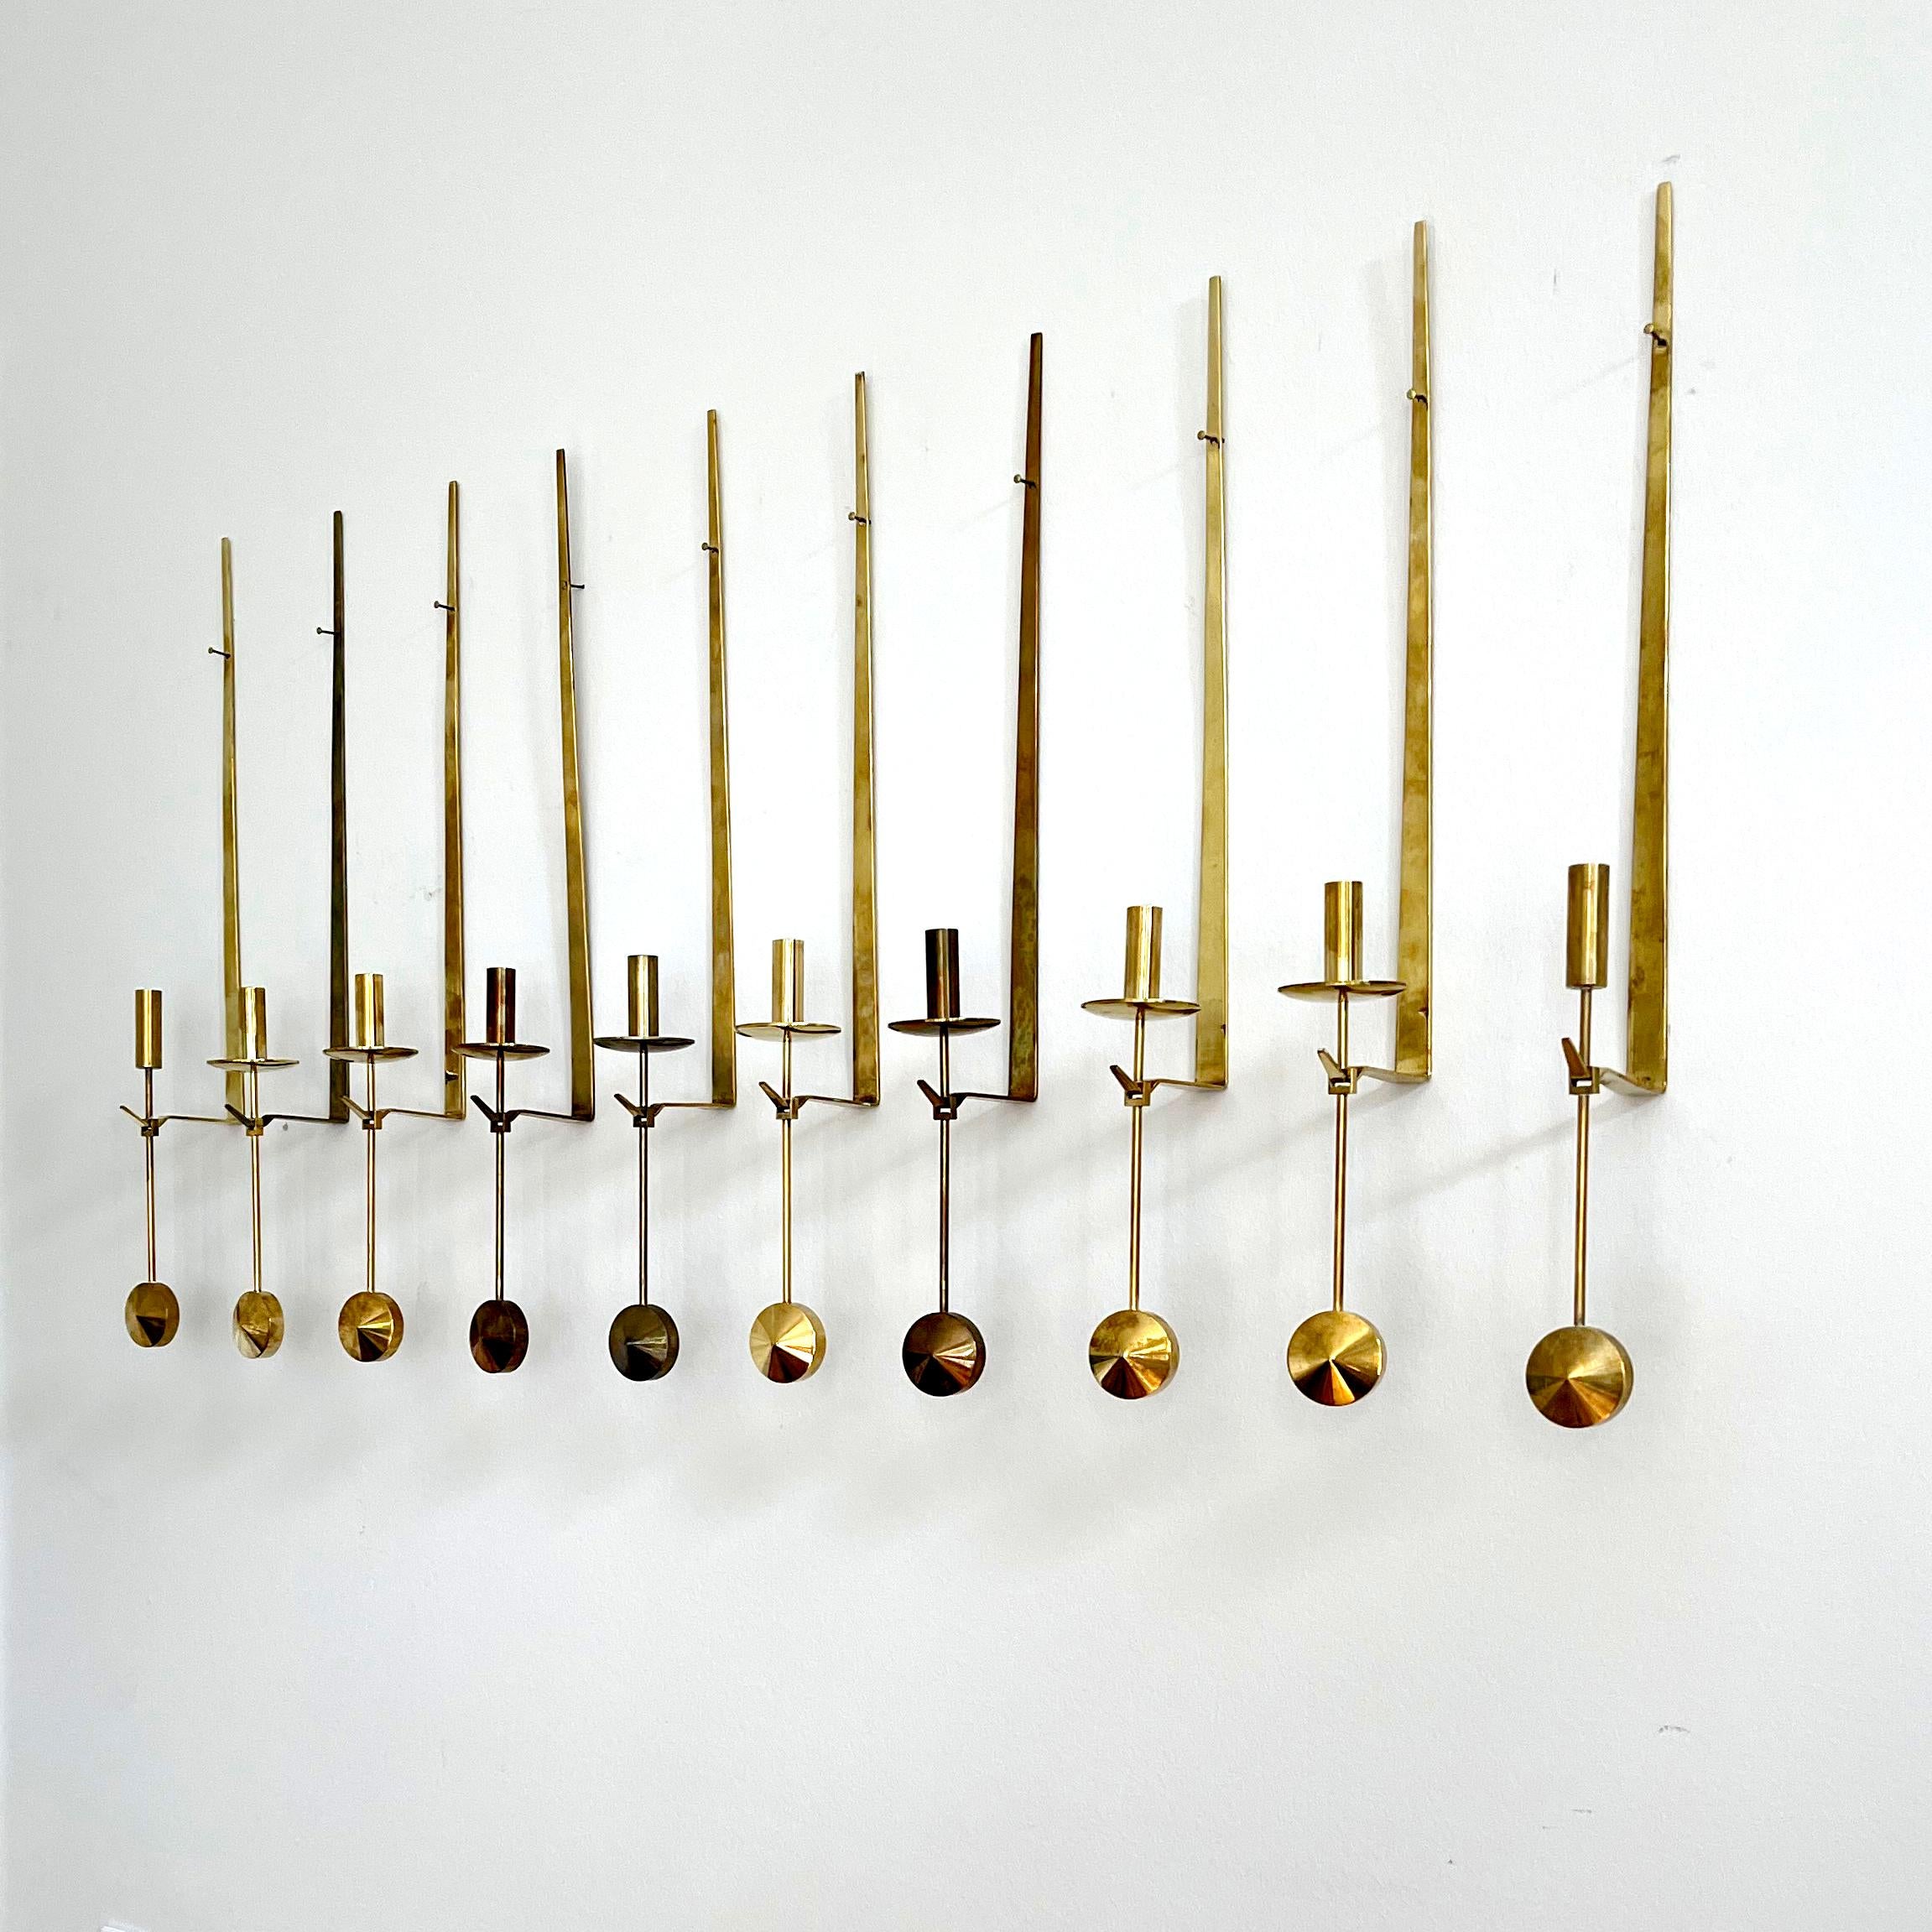 Pierre Forsell & Skultuna - Scandinavian Modern Design

A beautiful and decorative set of 10 wall-mounted candleholders, Pendal no 71, by Pierre Forsell.

Made by Skultuna, Sweden, 1950s. Signed with impressed manufacturer's mark to